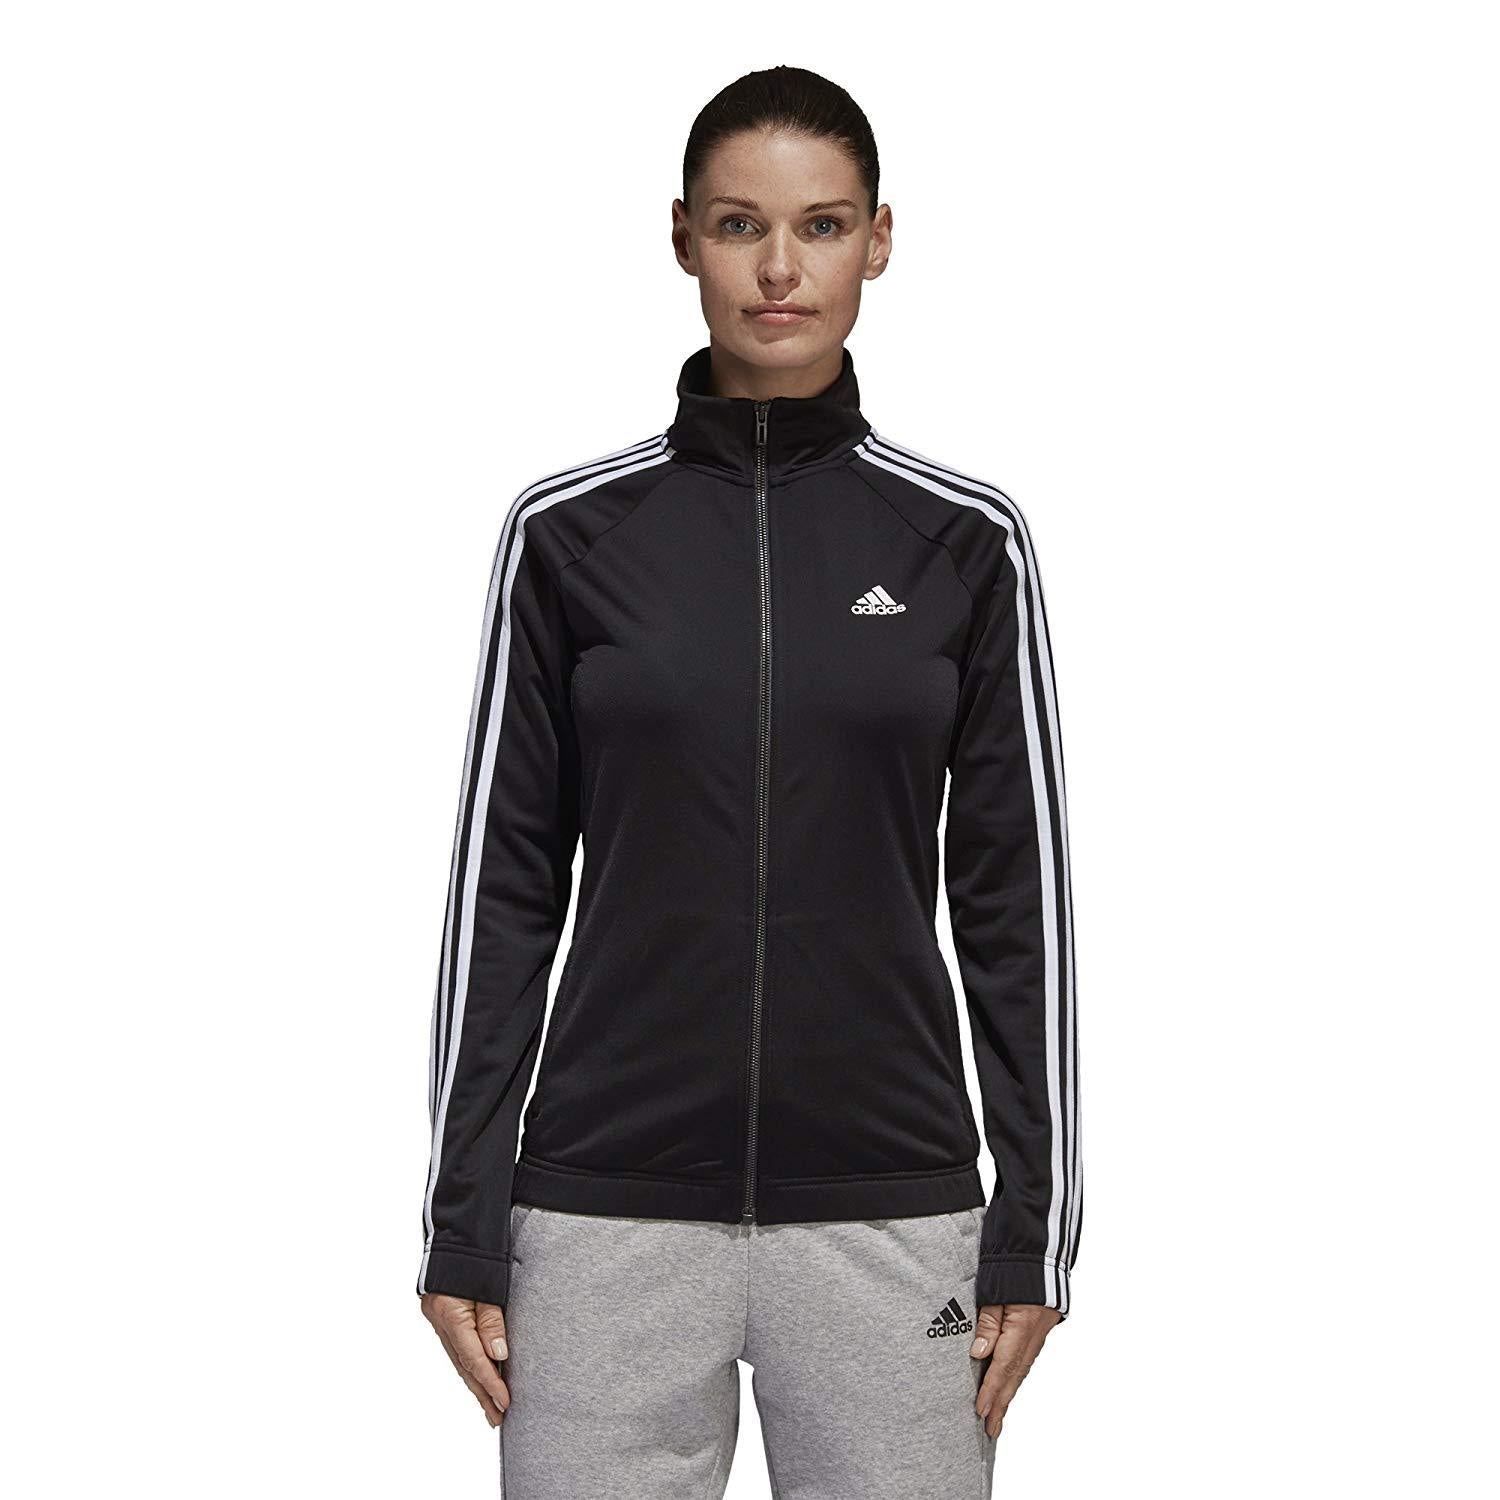 BK4658] Womens Designed-2-Move Track Jacket – rubbersoled